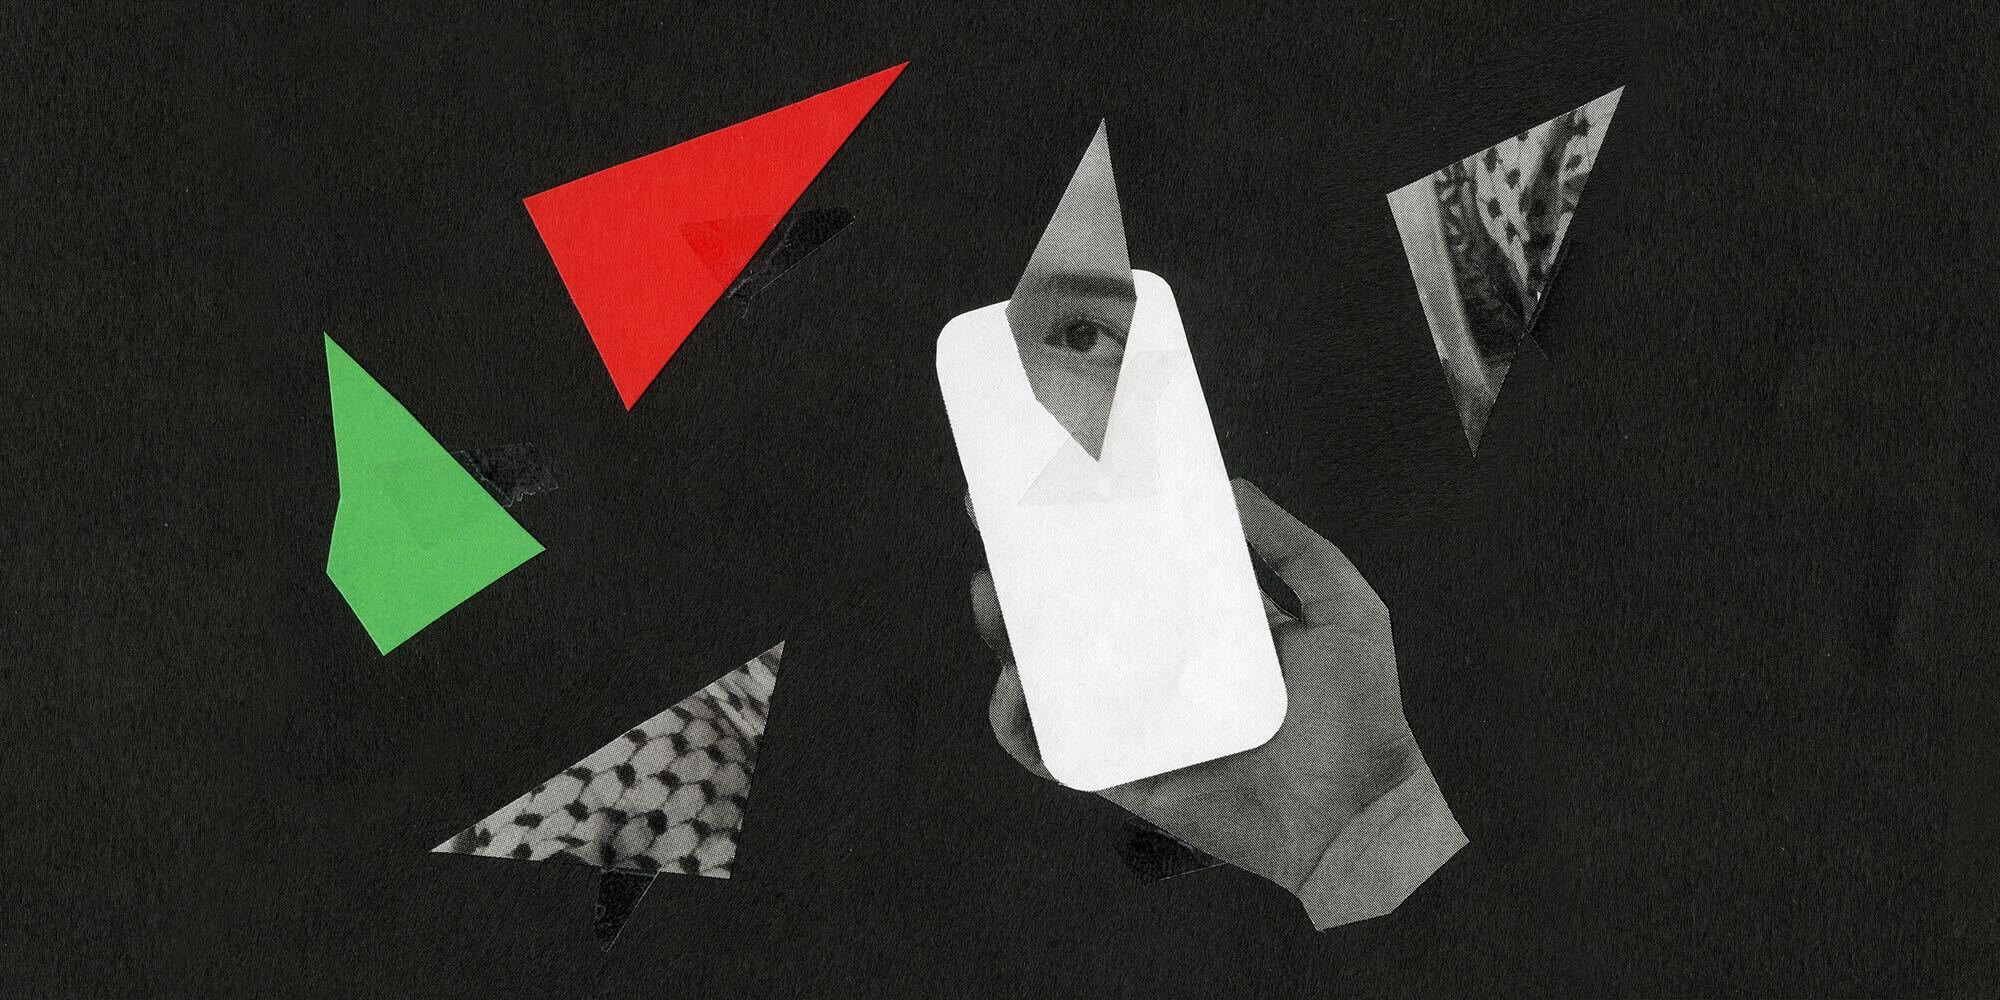 A collage on a fuzzy black background, with a disembodied hand holding a white cutout in the shape of a phone. There are fractured pieces scattered over the image, including one green triangle, one red triangle, and two triangles that show pieces of a keffiyeh. There is a fractured shard of an eye layered over the phone.